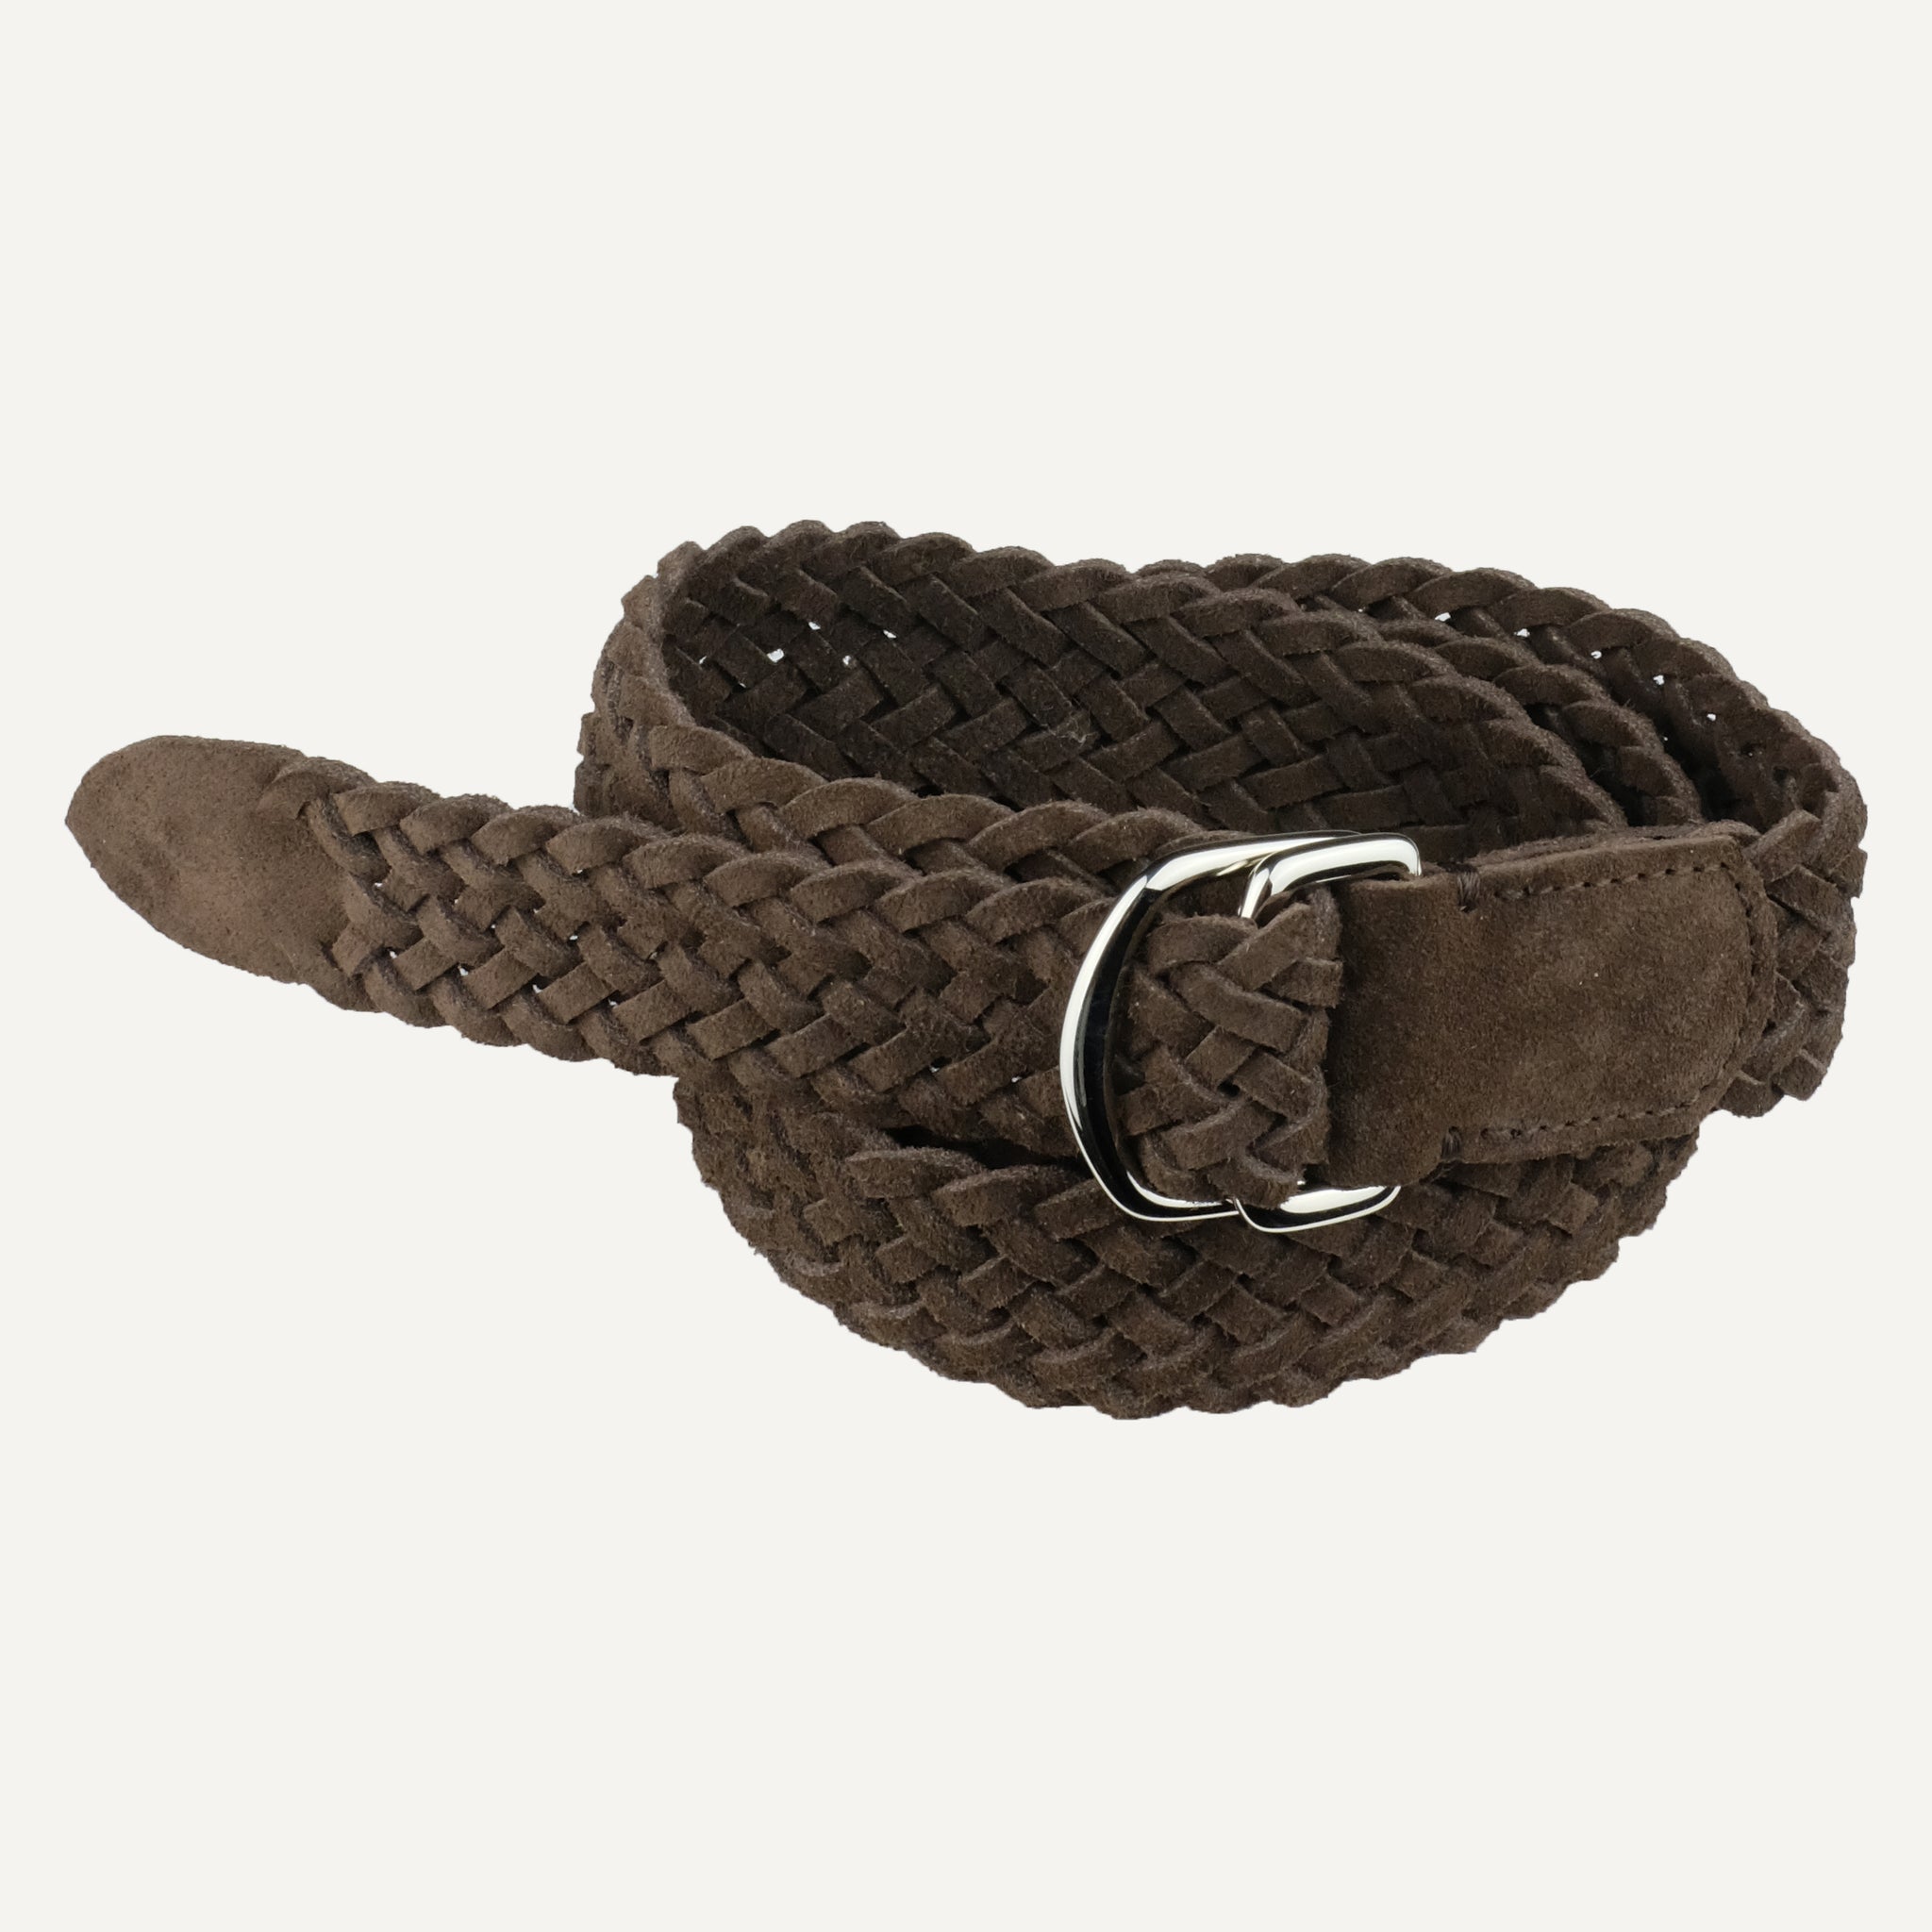 2 Double O-Ring Woven Belt in Chocolate Leather